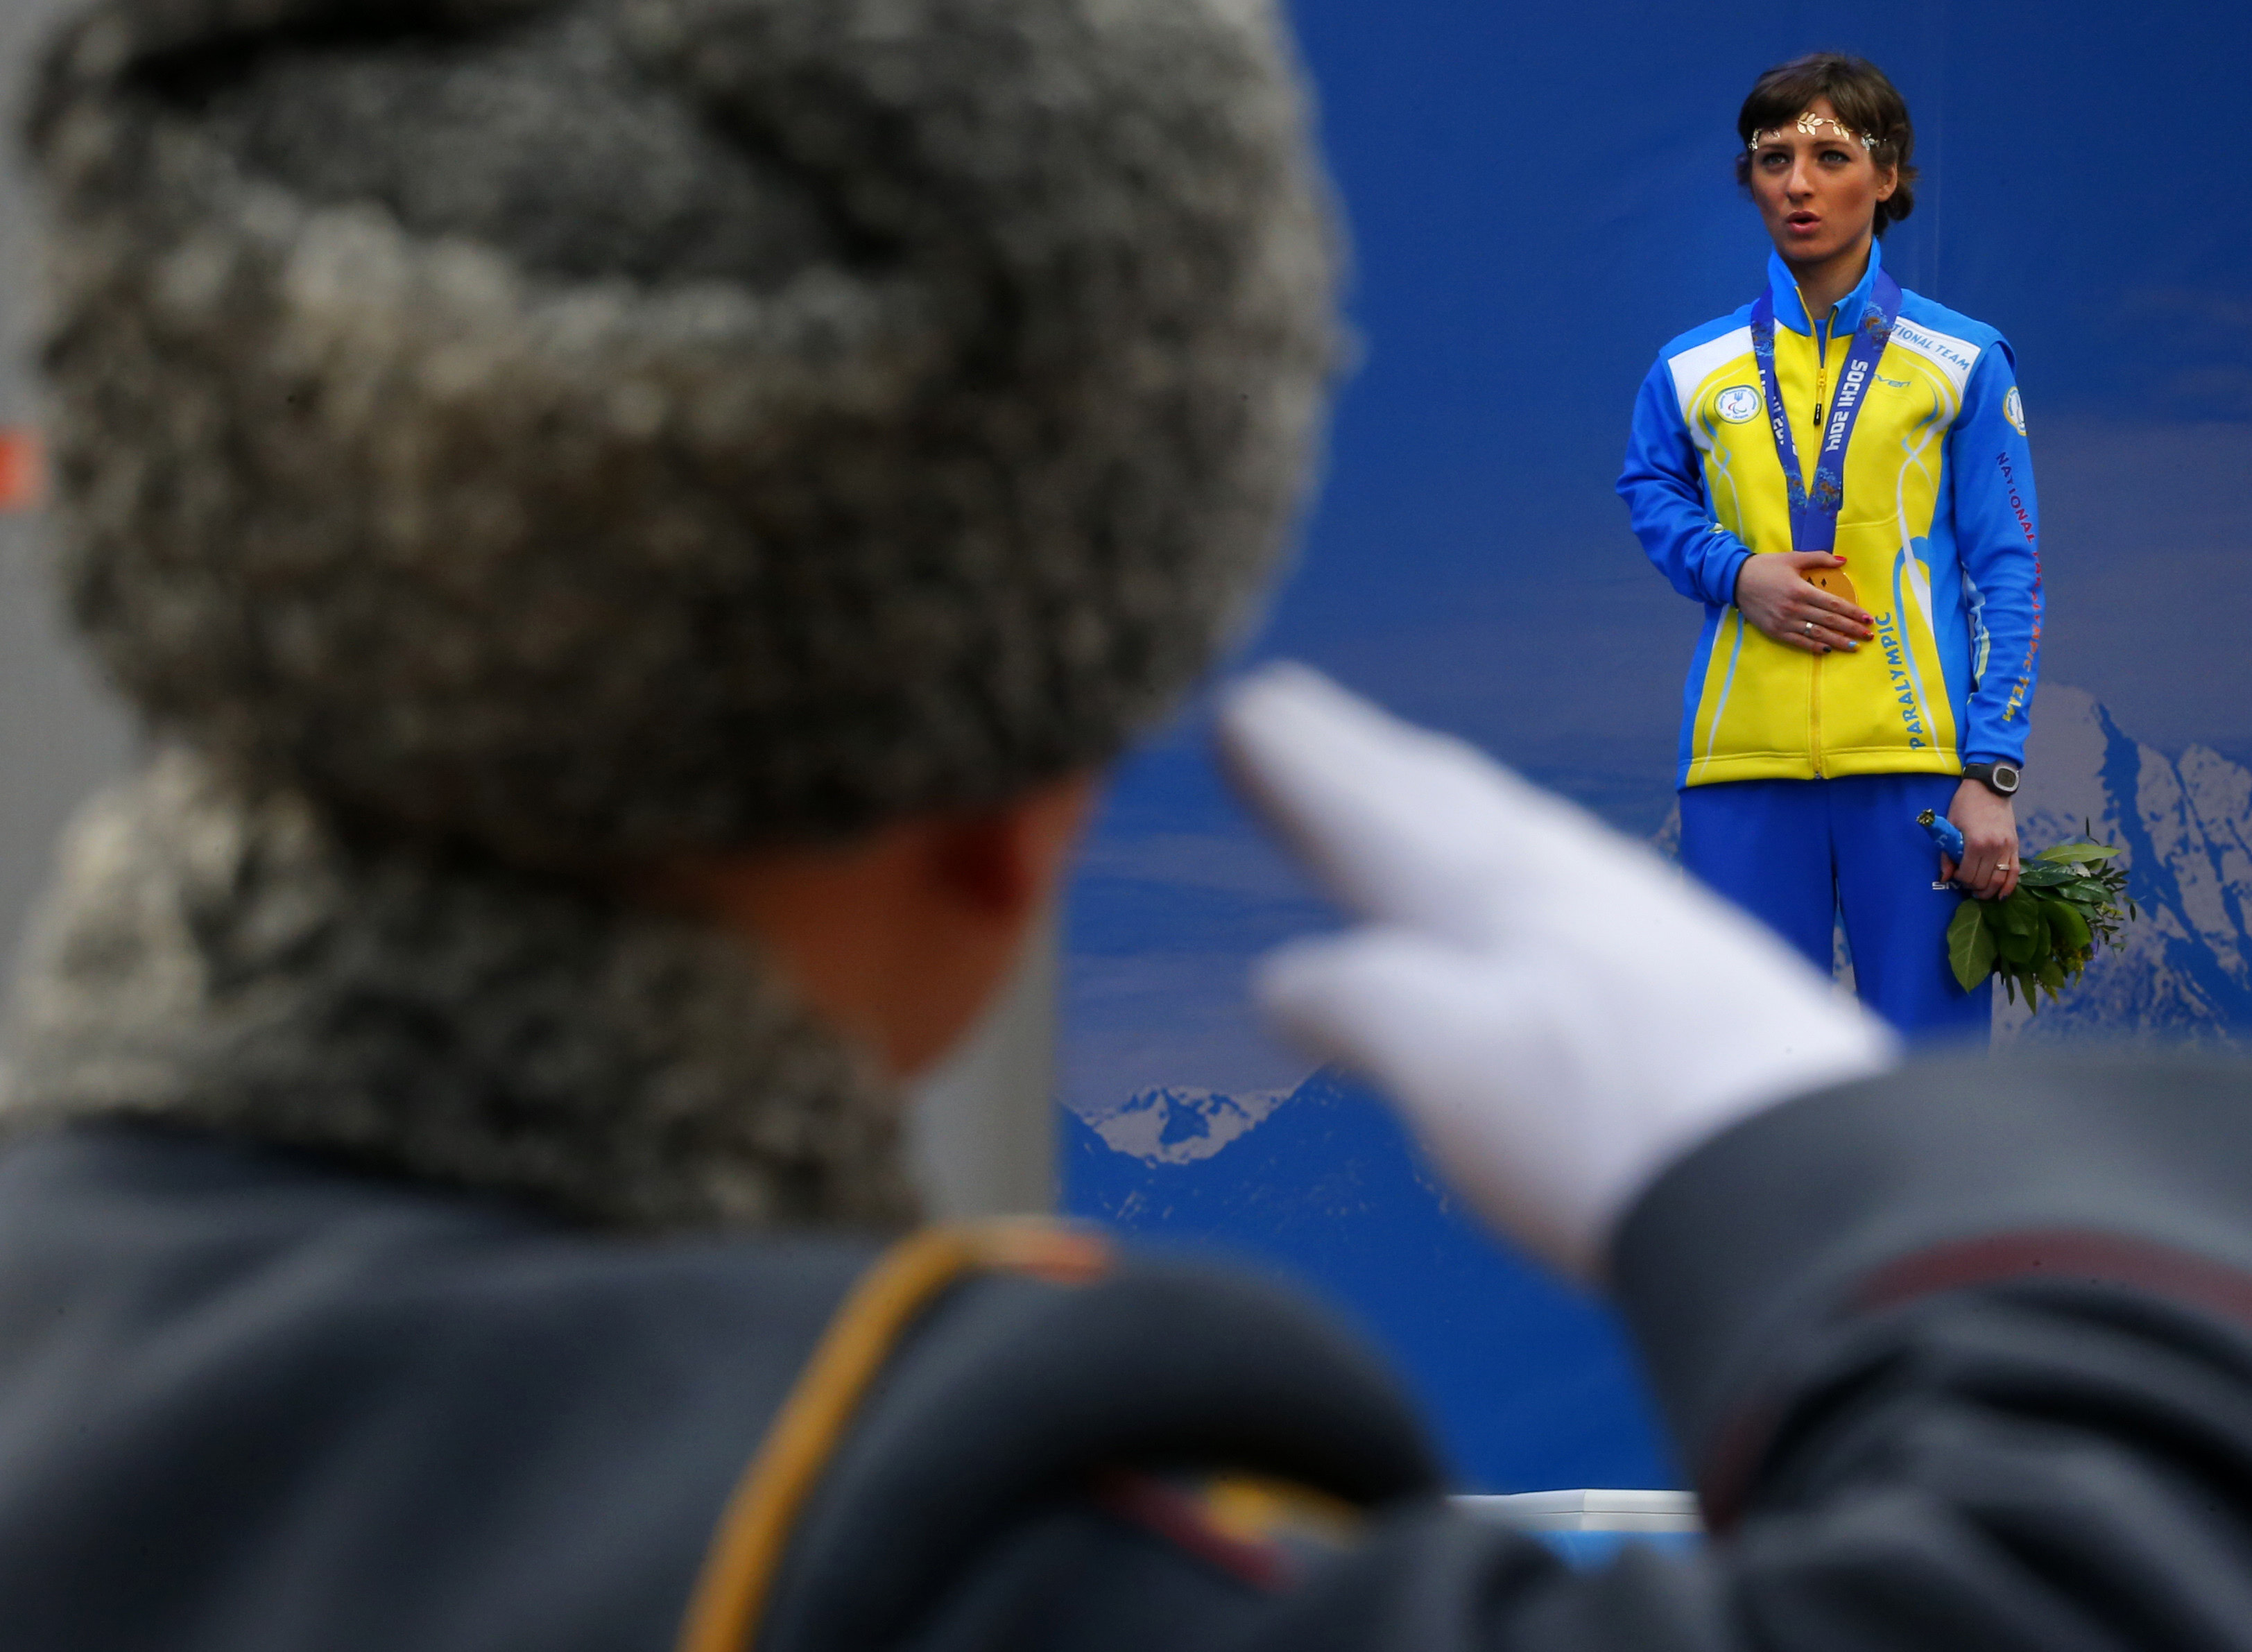 FILE - A Russian honour guard soldier salutes as Ukraine’s Oleksandra Kononova covers her gold medal with her hand after winning the women’s biathlon 12.5km standing event during a medal ceremony at the 2014 Winter Paralympics. Photo: AP